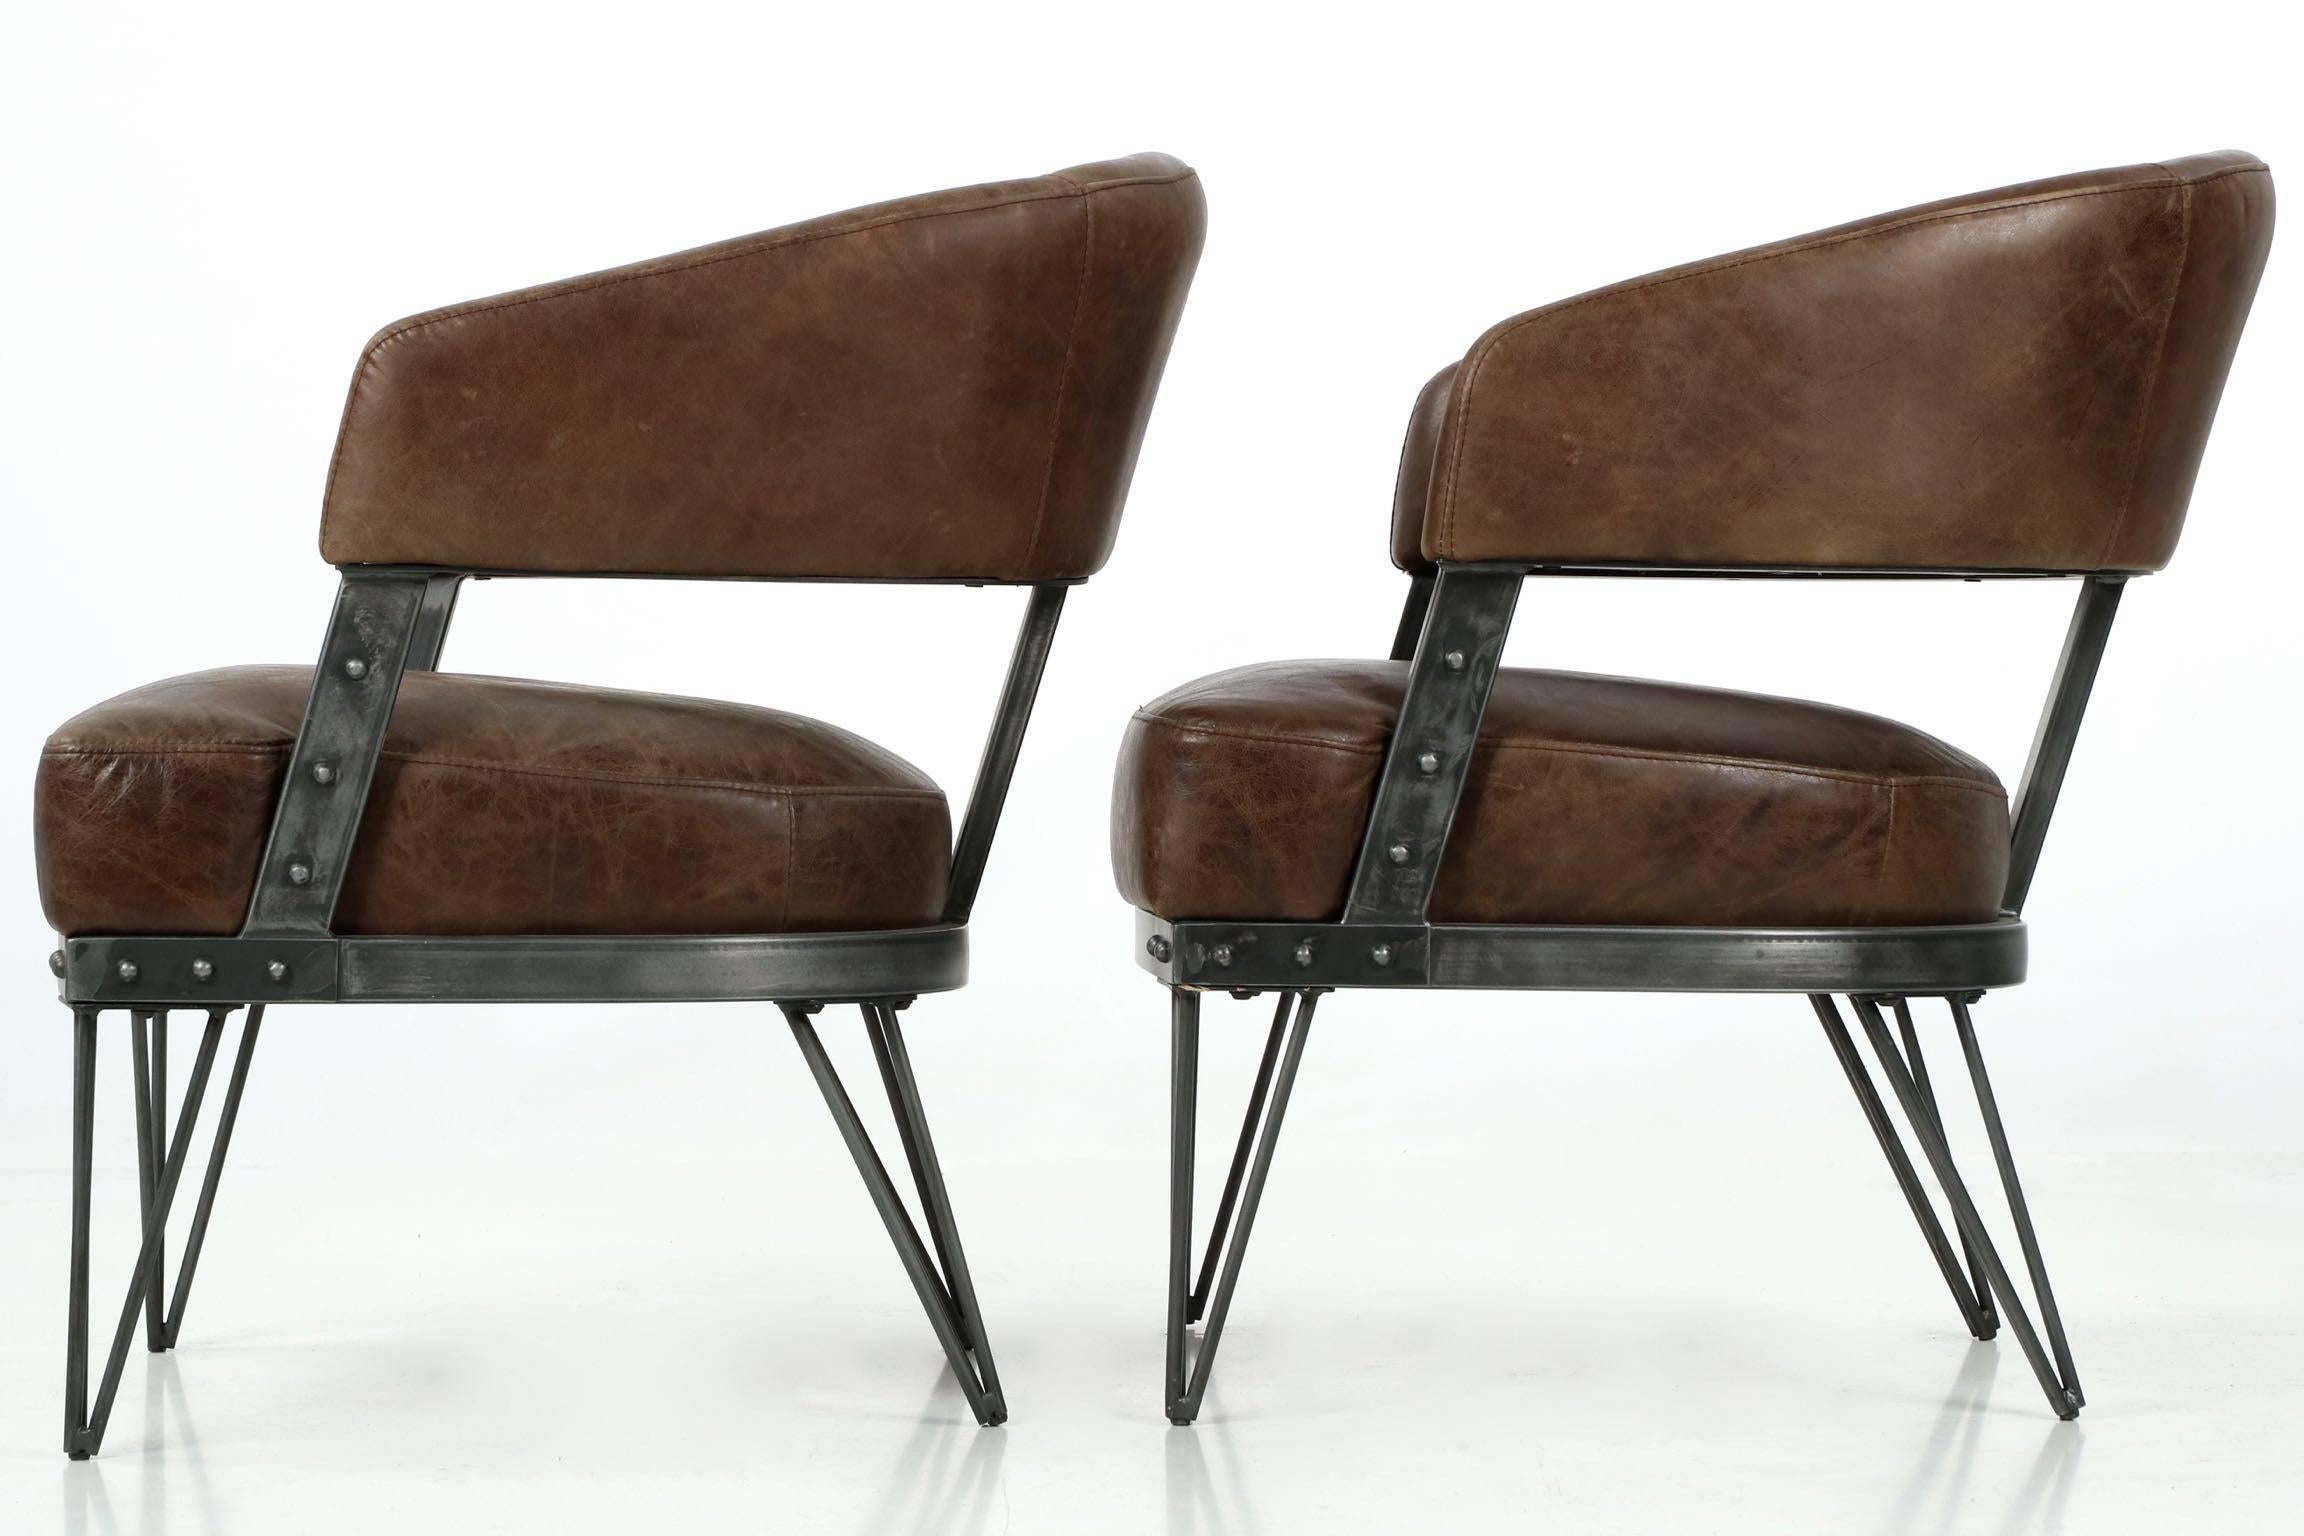 Contemporary Modern Pair of French Industrial Style Leather and Patinated Steel Arm Chairs